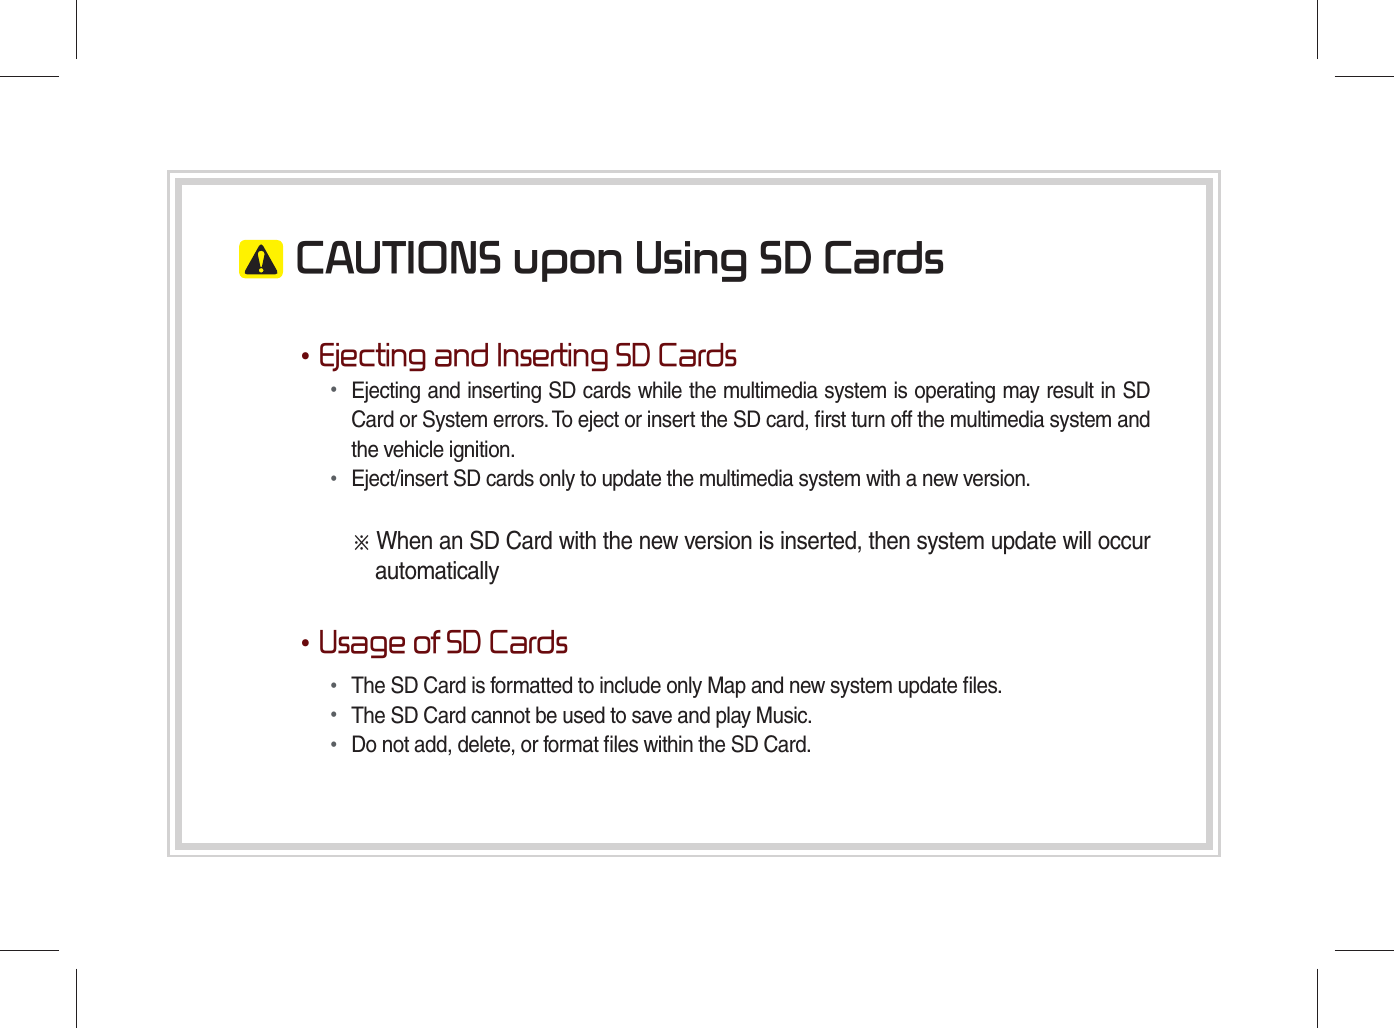  CAUTIONS upon Using SD Cards•Ejecting and Inserting SD Cards• Ejecting and inserting SD cards while the multimedia system is operating may result in SD Card or System errors. To eject or insert the SD card, ﬁ rst turn off the multimedia system and the vehicle ignition.• Eject/insert SD cards only to update the multimedia system with a new version.※ When an SD Card with the new version is inserted, then system update will occur automatically•Usage of SD Cards• The SD Card is formatted to include only Map and new system update ﬁ les.• The SD Card cannot be used to save and play Music.• Do not add, delete, or format ﬁ les within the SD Card.